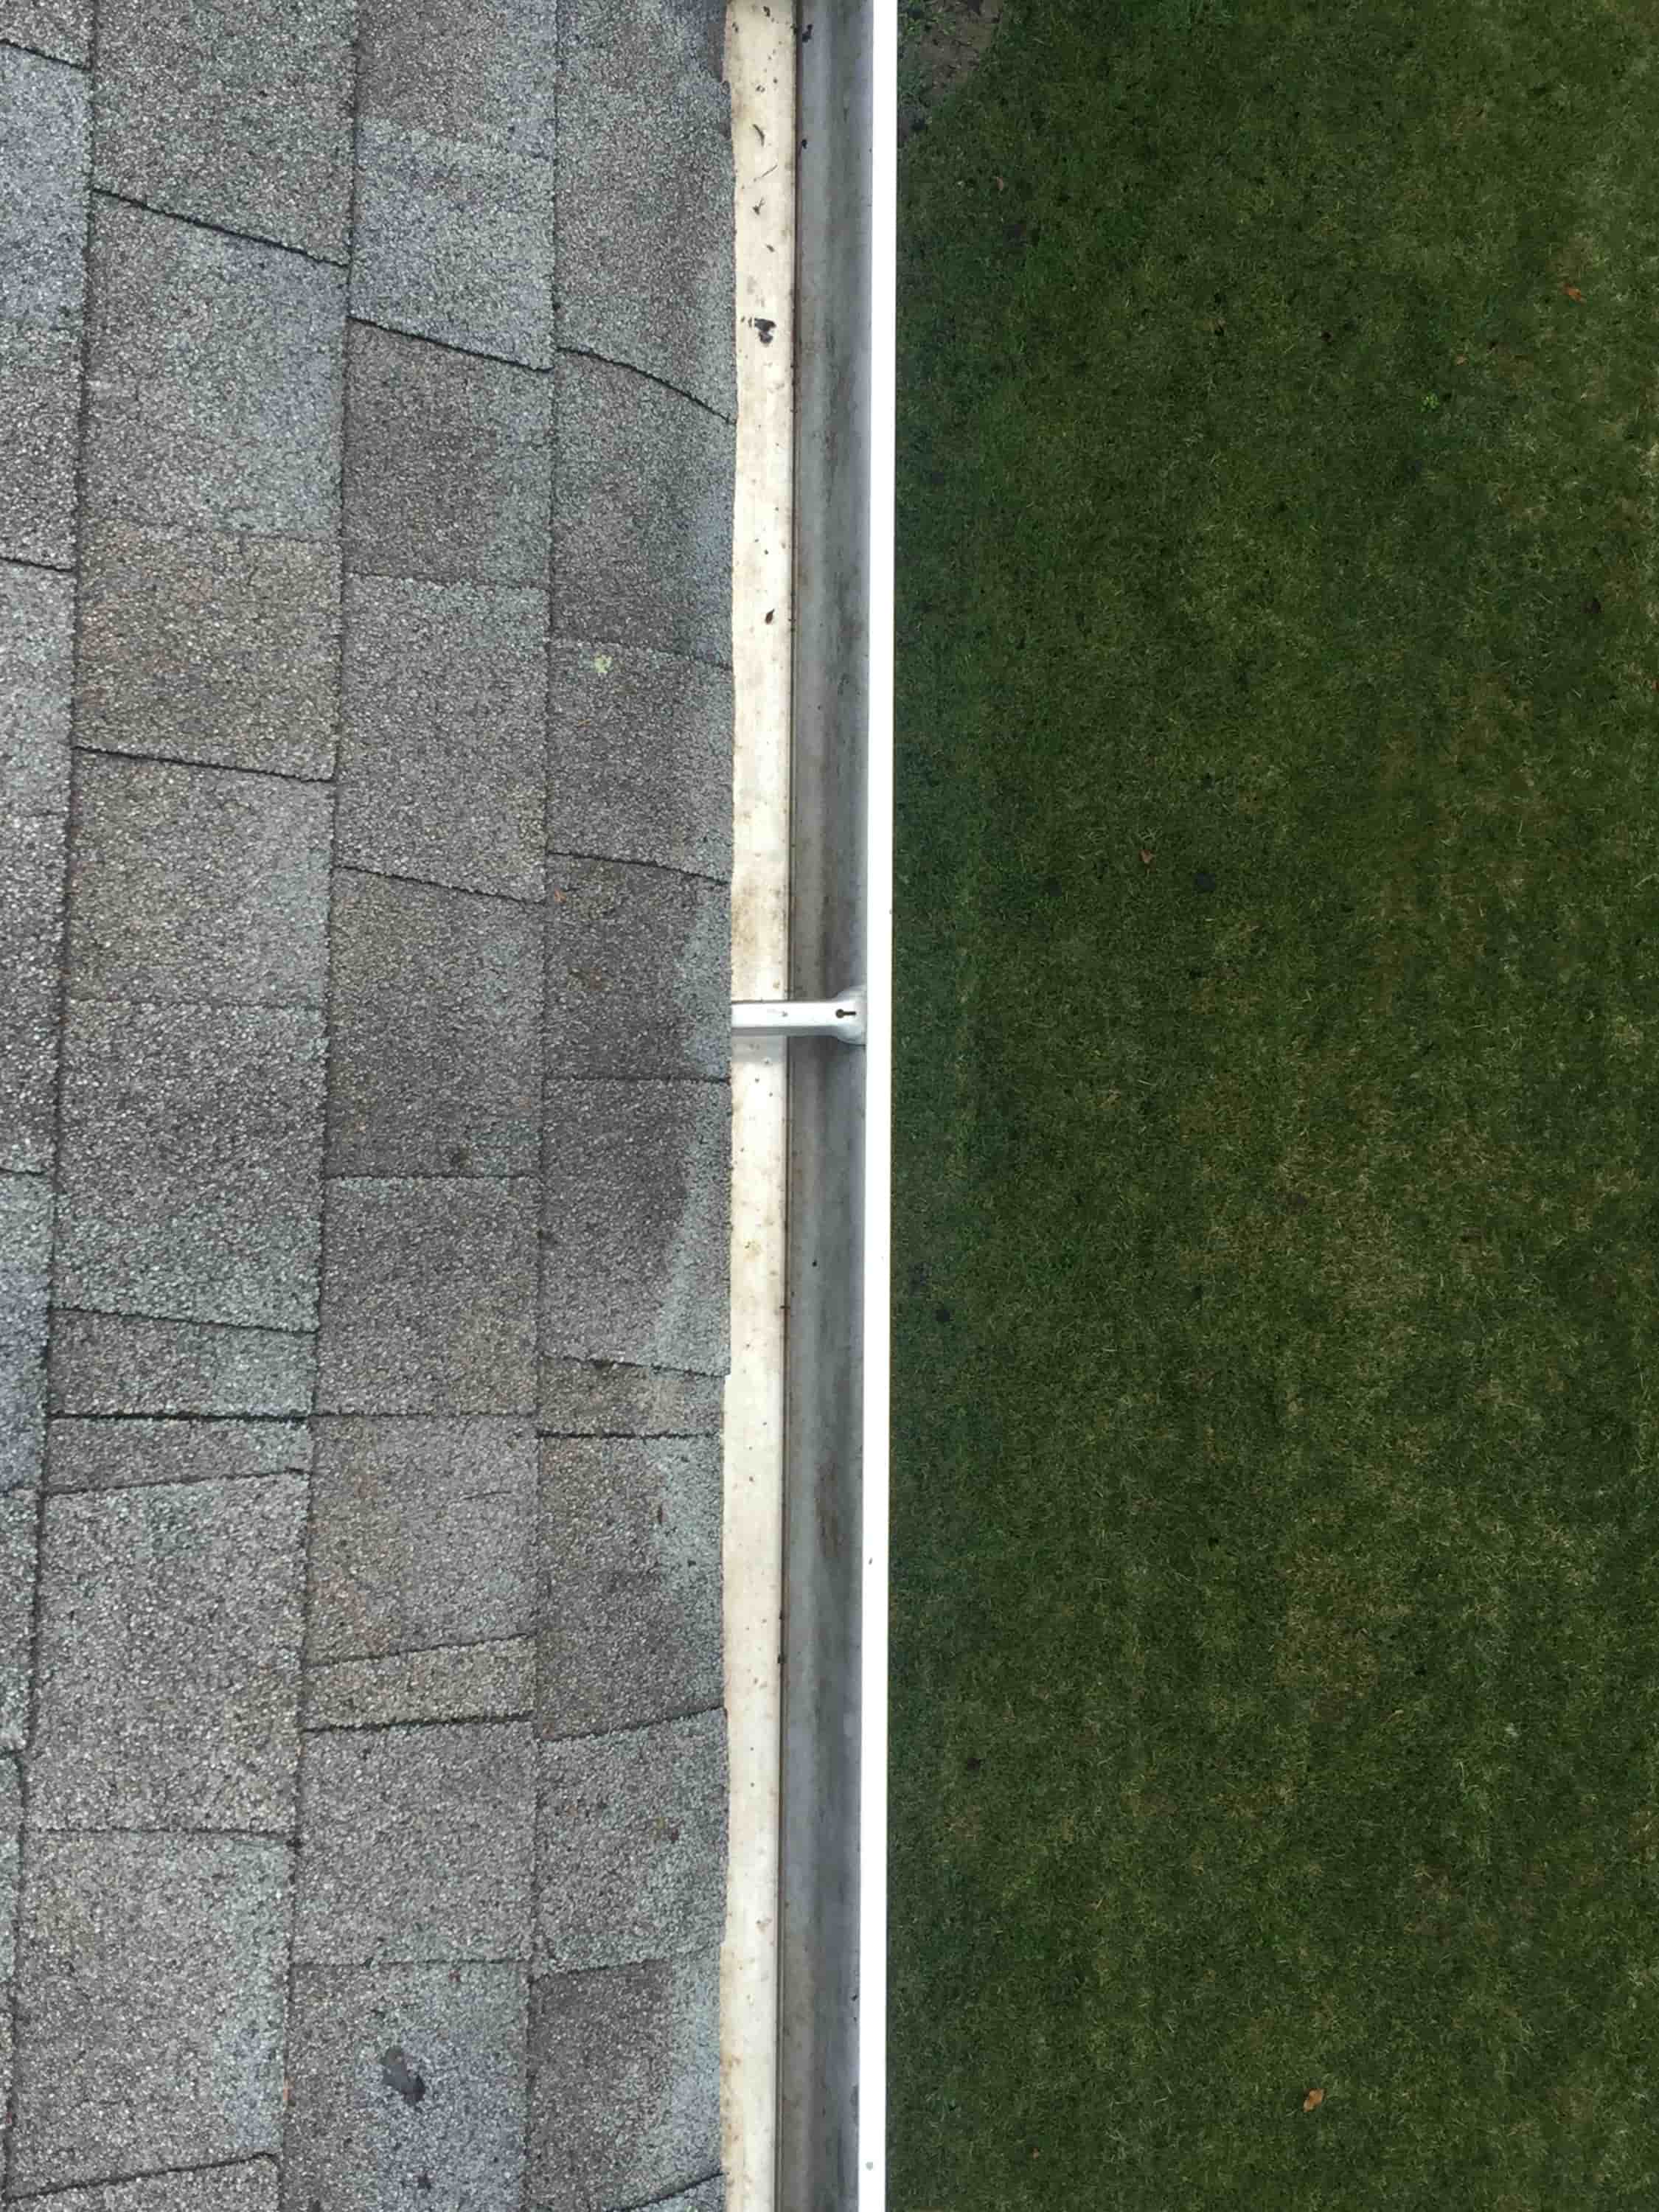 gutter cleaning with pressure washer